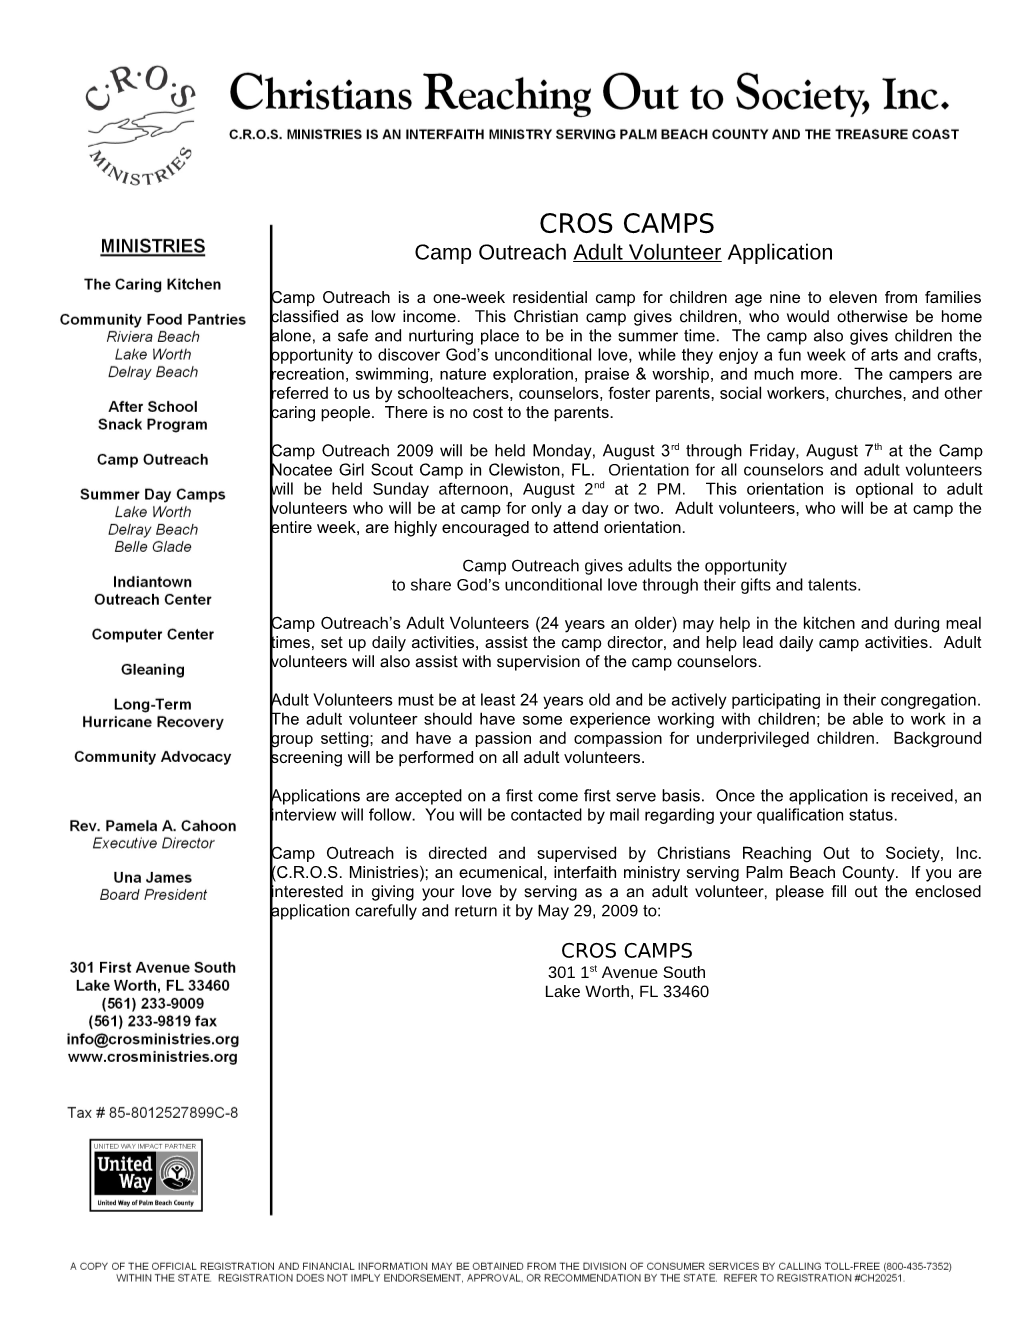 Camp Outreach Adult Volunteer Application